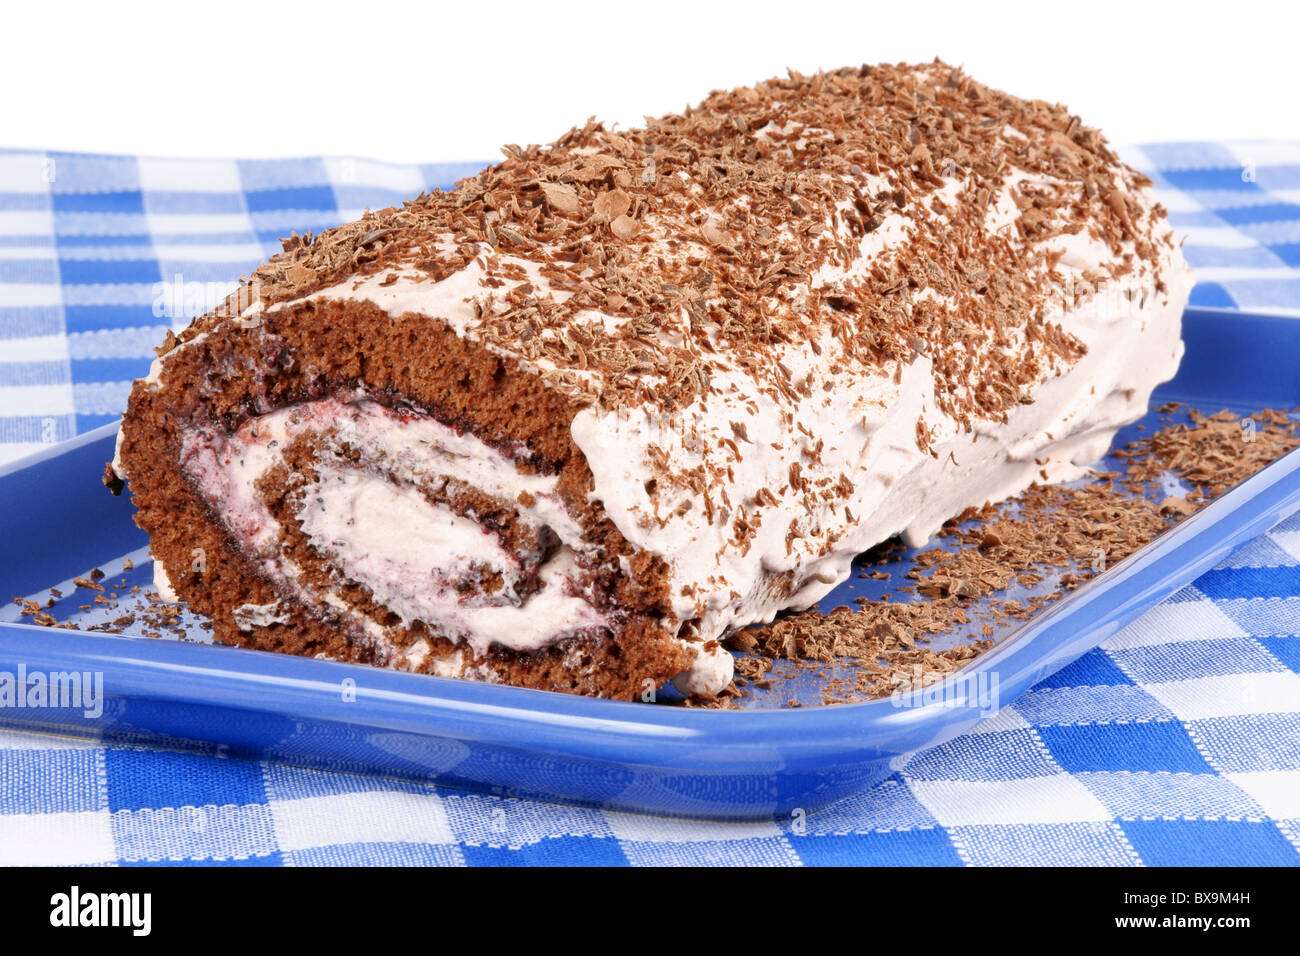 Chocolate swiss roll cake with berries marmalade and whipped cream served on a blue plate over a chequered background Stock Photo